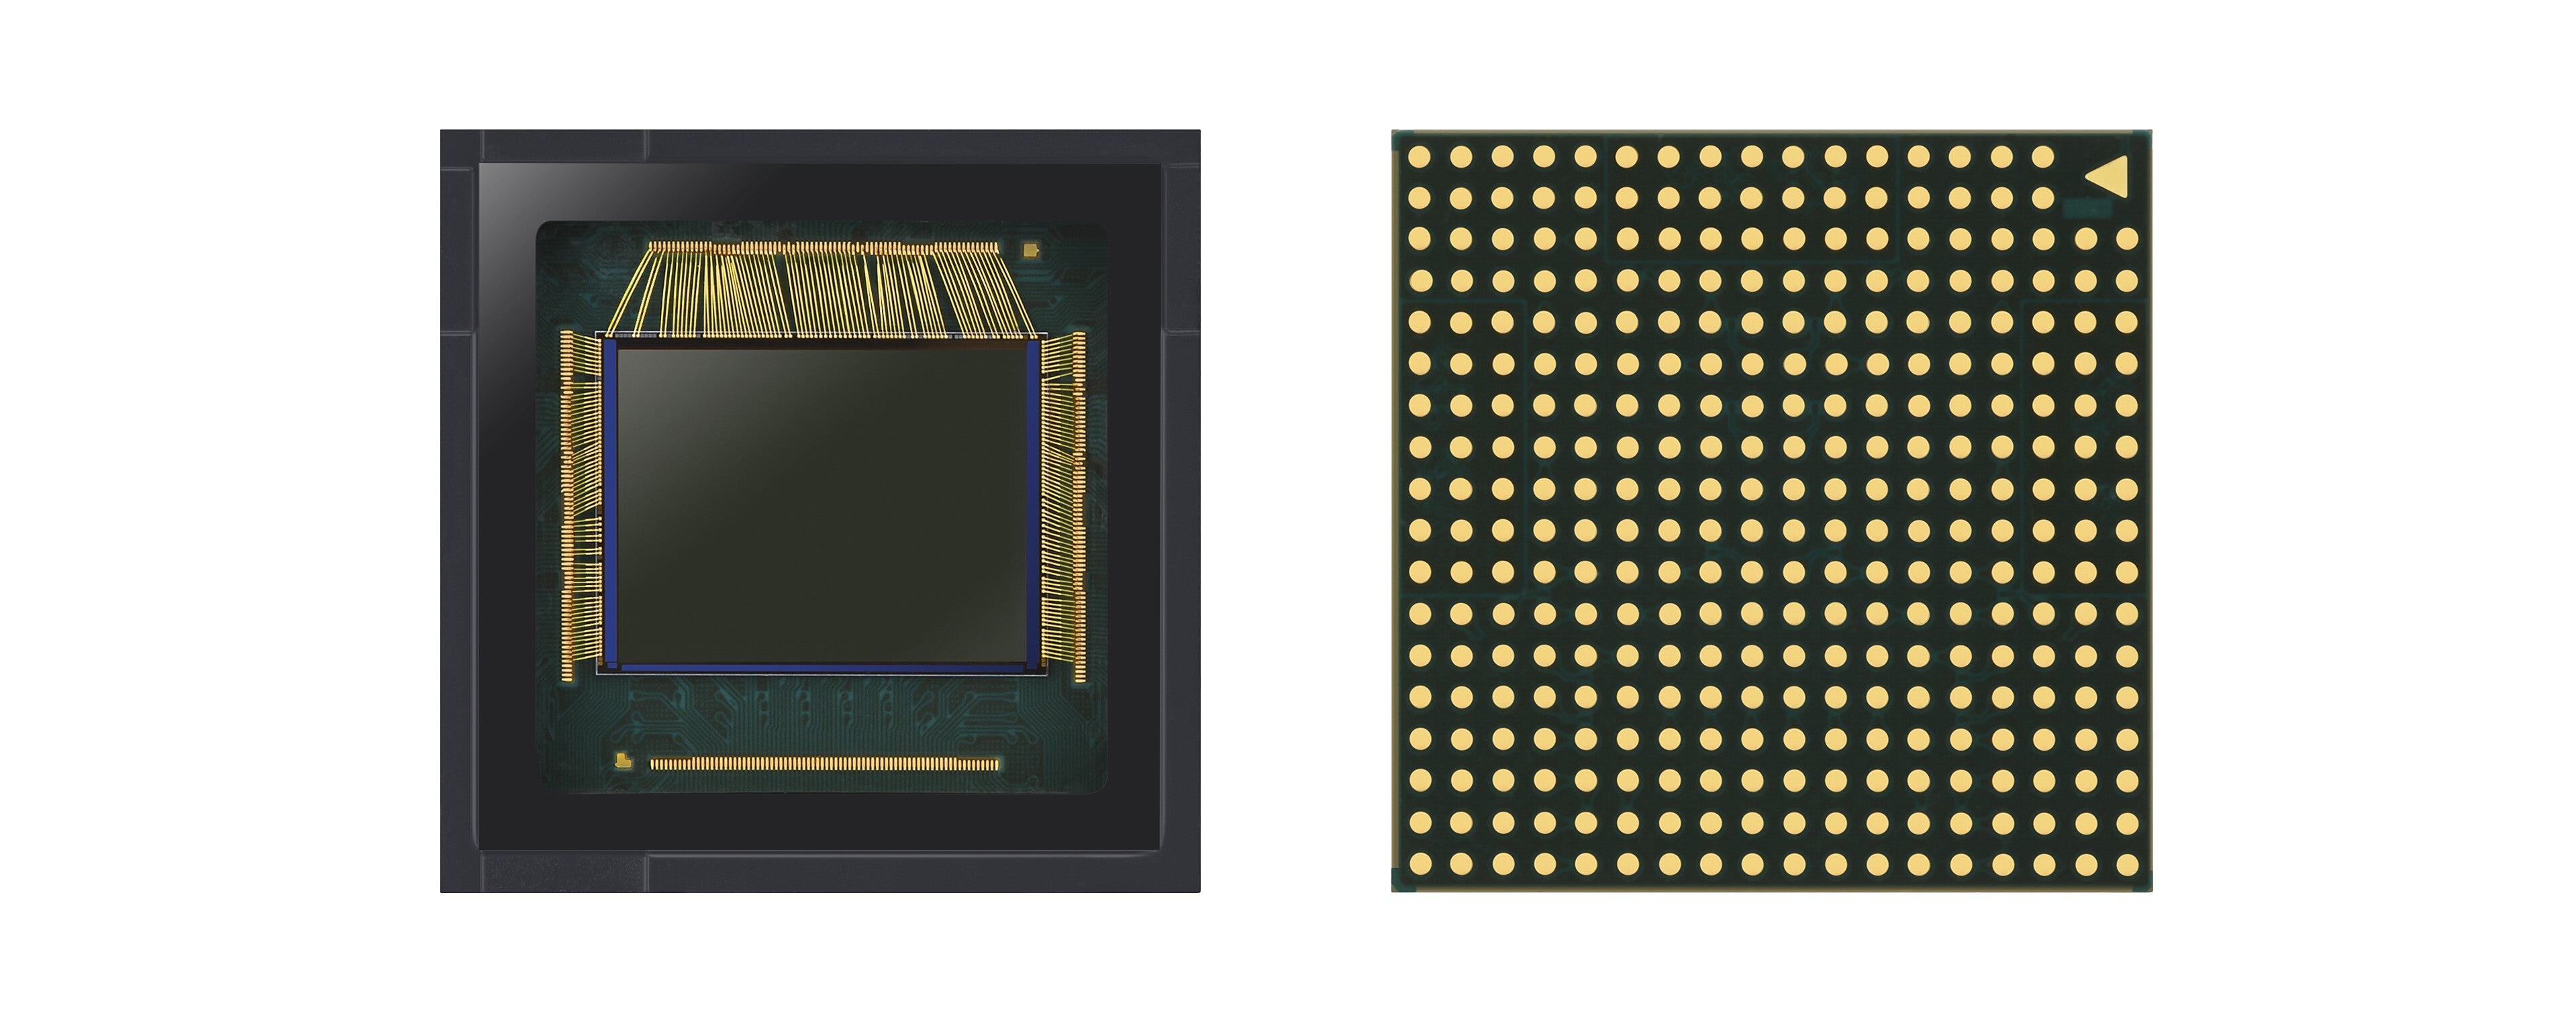 Samsung details the Nonacell Technology behind its 108MP sensor